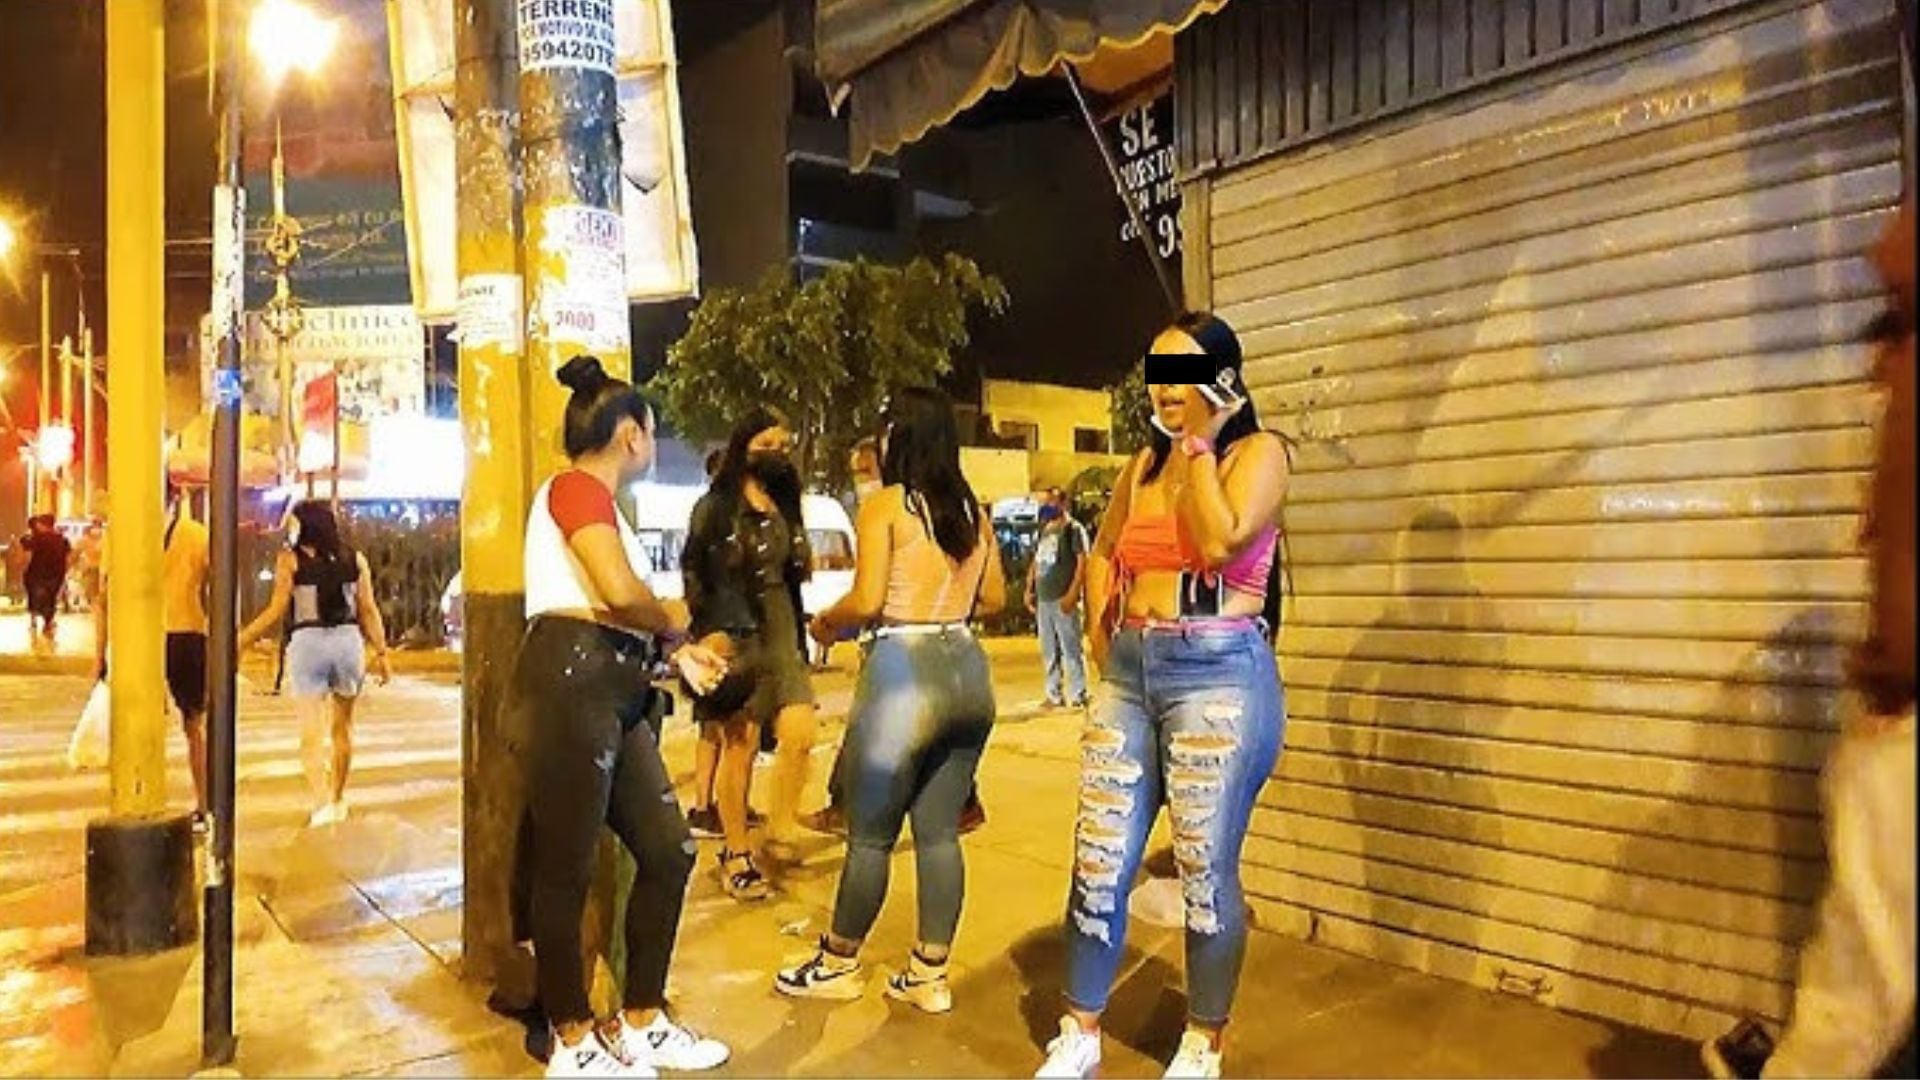 A group of Venezuelan women are standing on a corner near Jirón Risso.  Apparently they are waiting for clients and always have the threatening gaze of the members of the so-called sex mafias.